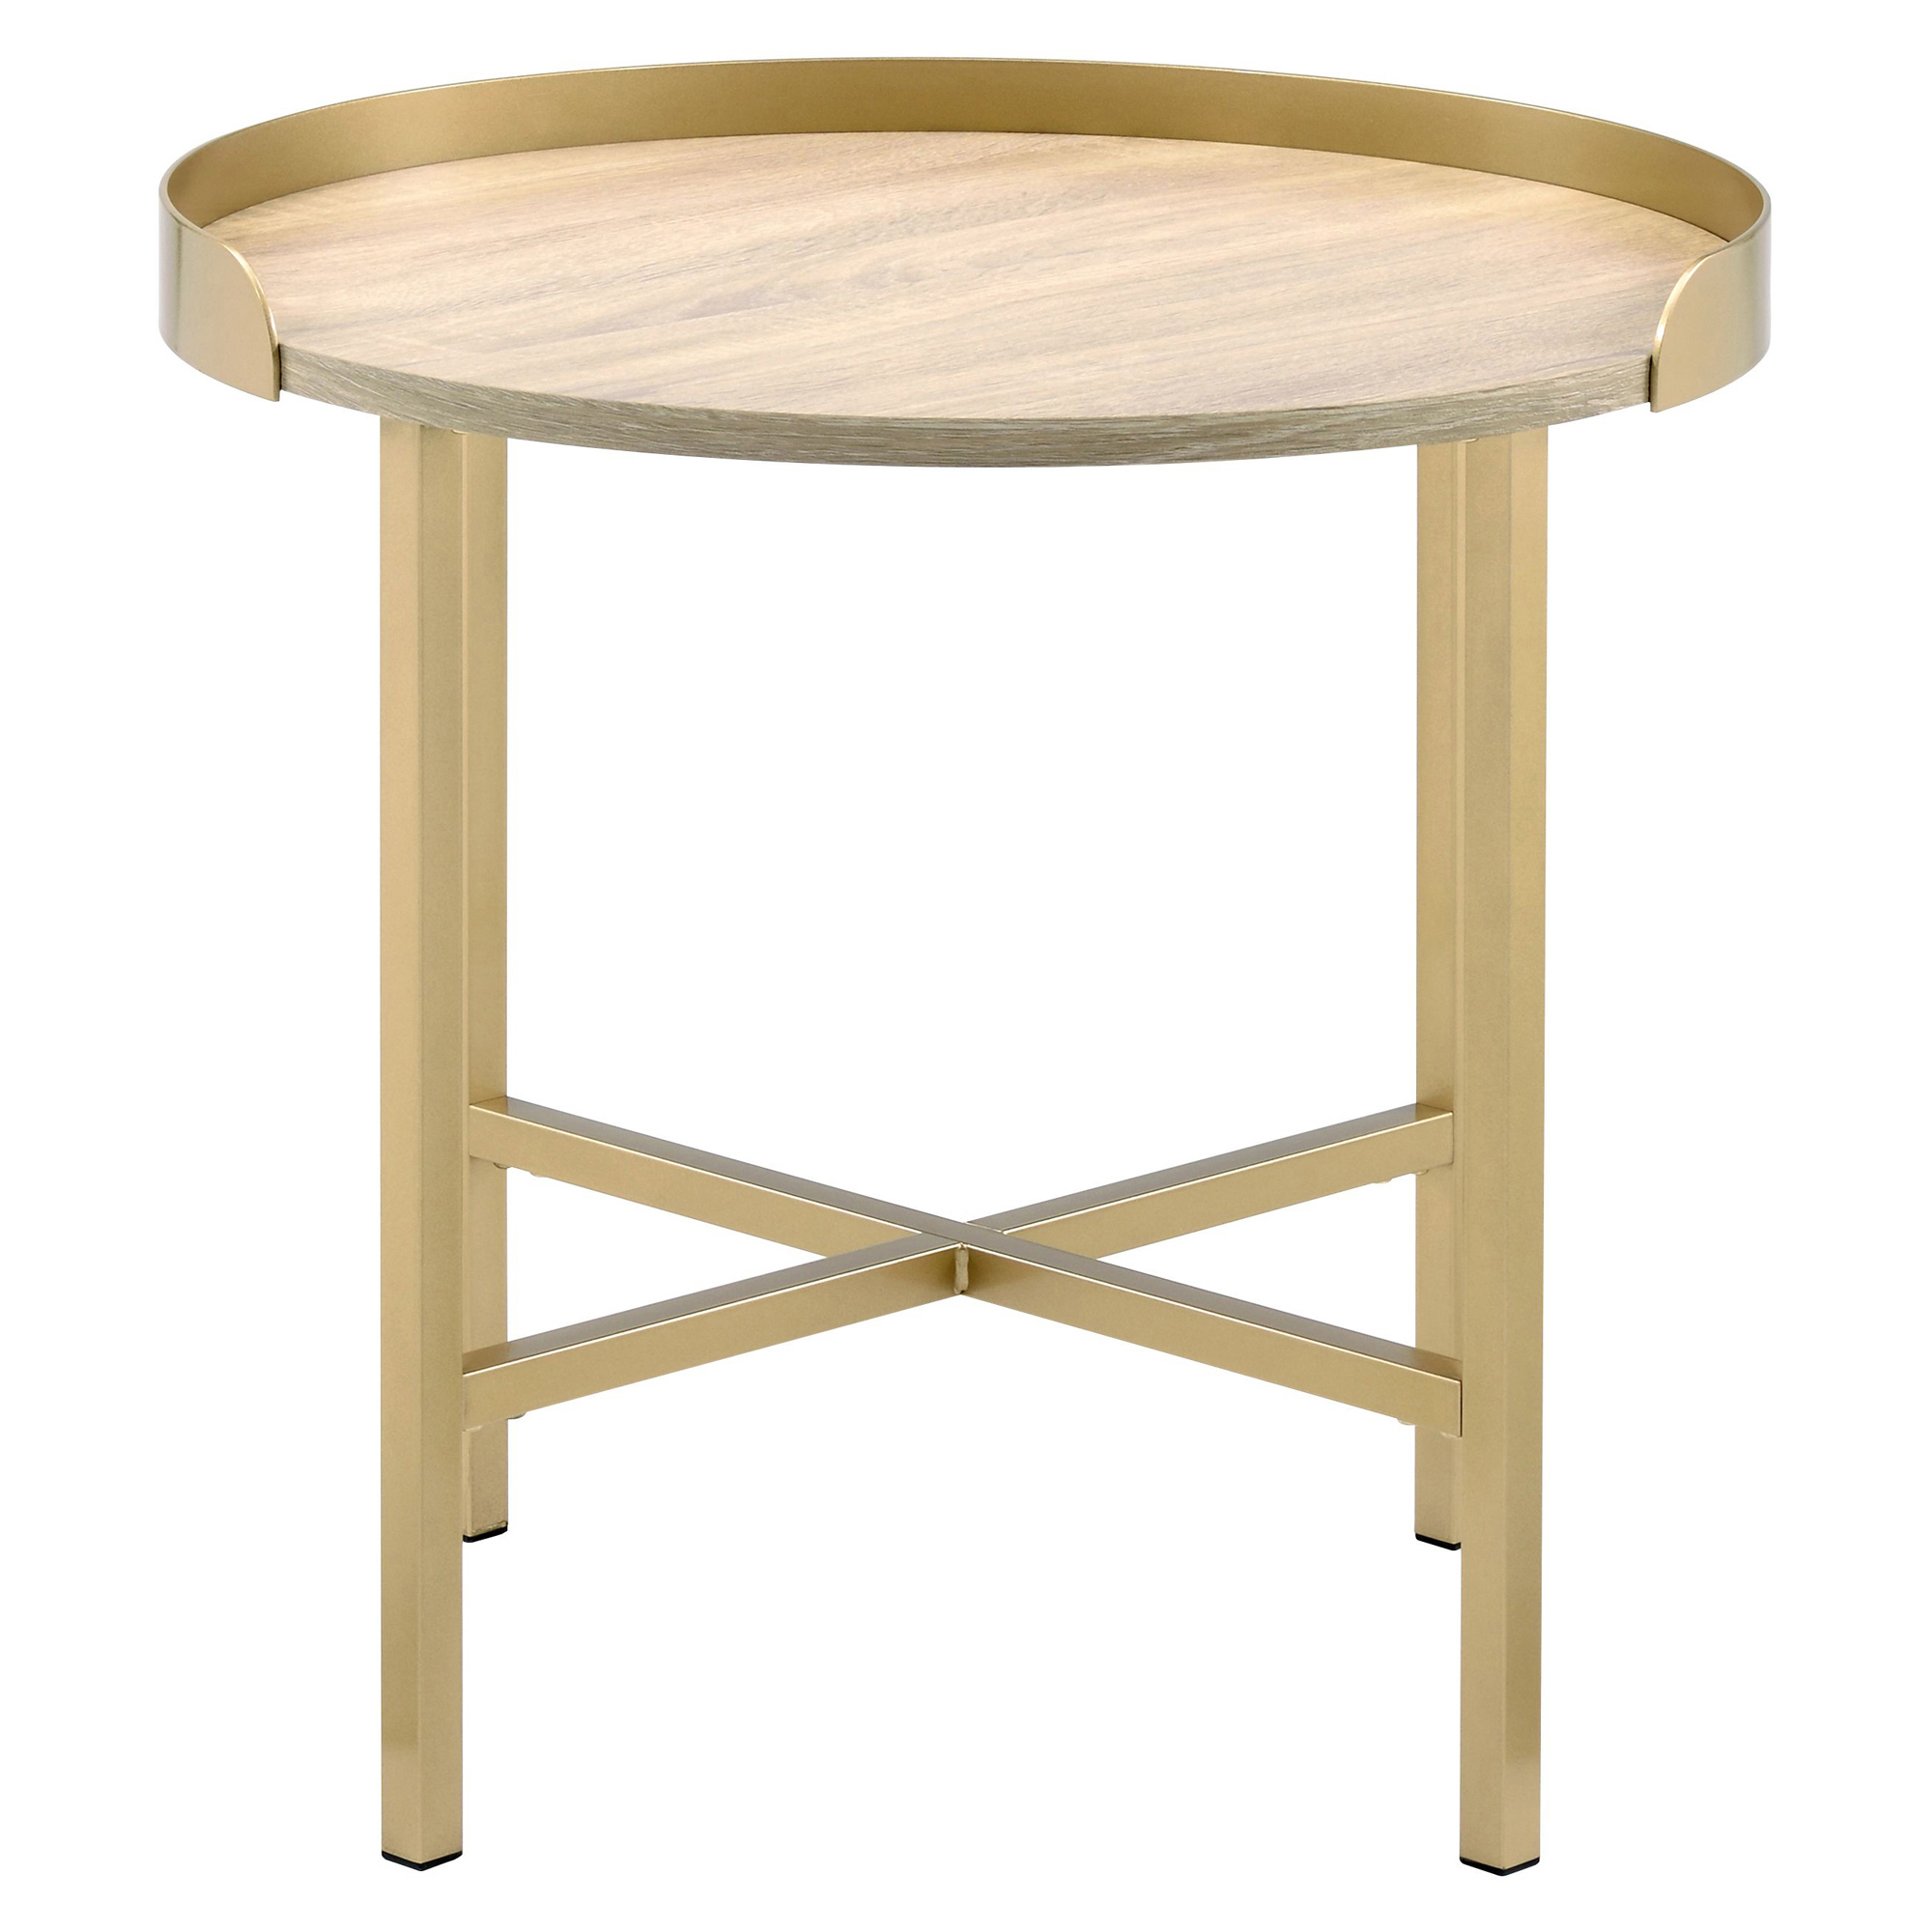 ACME Mithea Round End Table in Oak and Gold - image 2 of 5